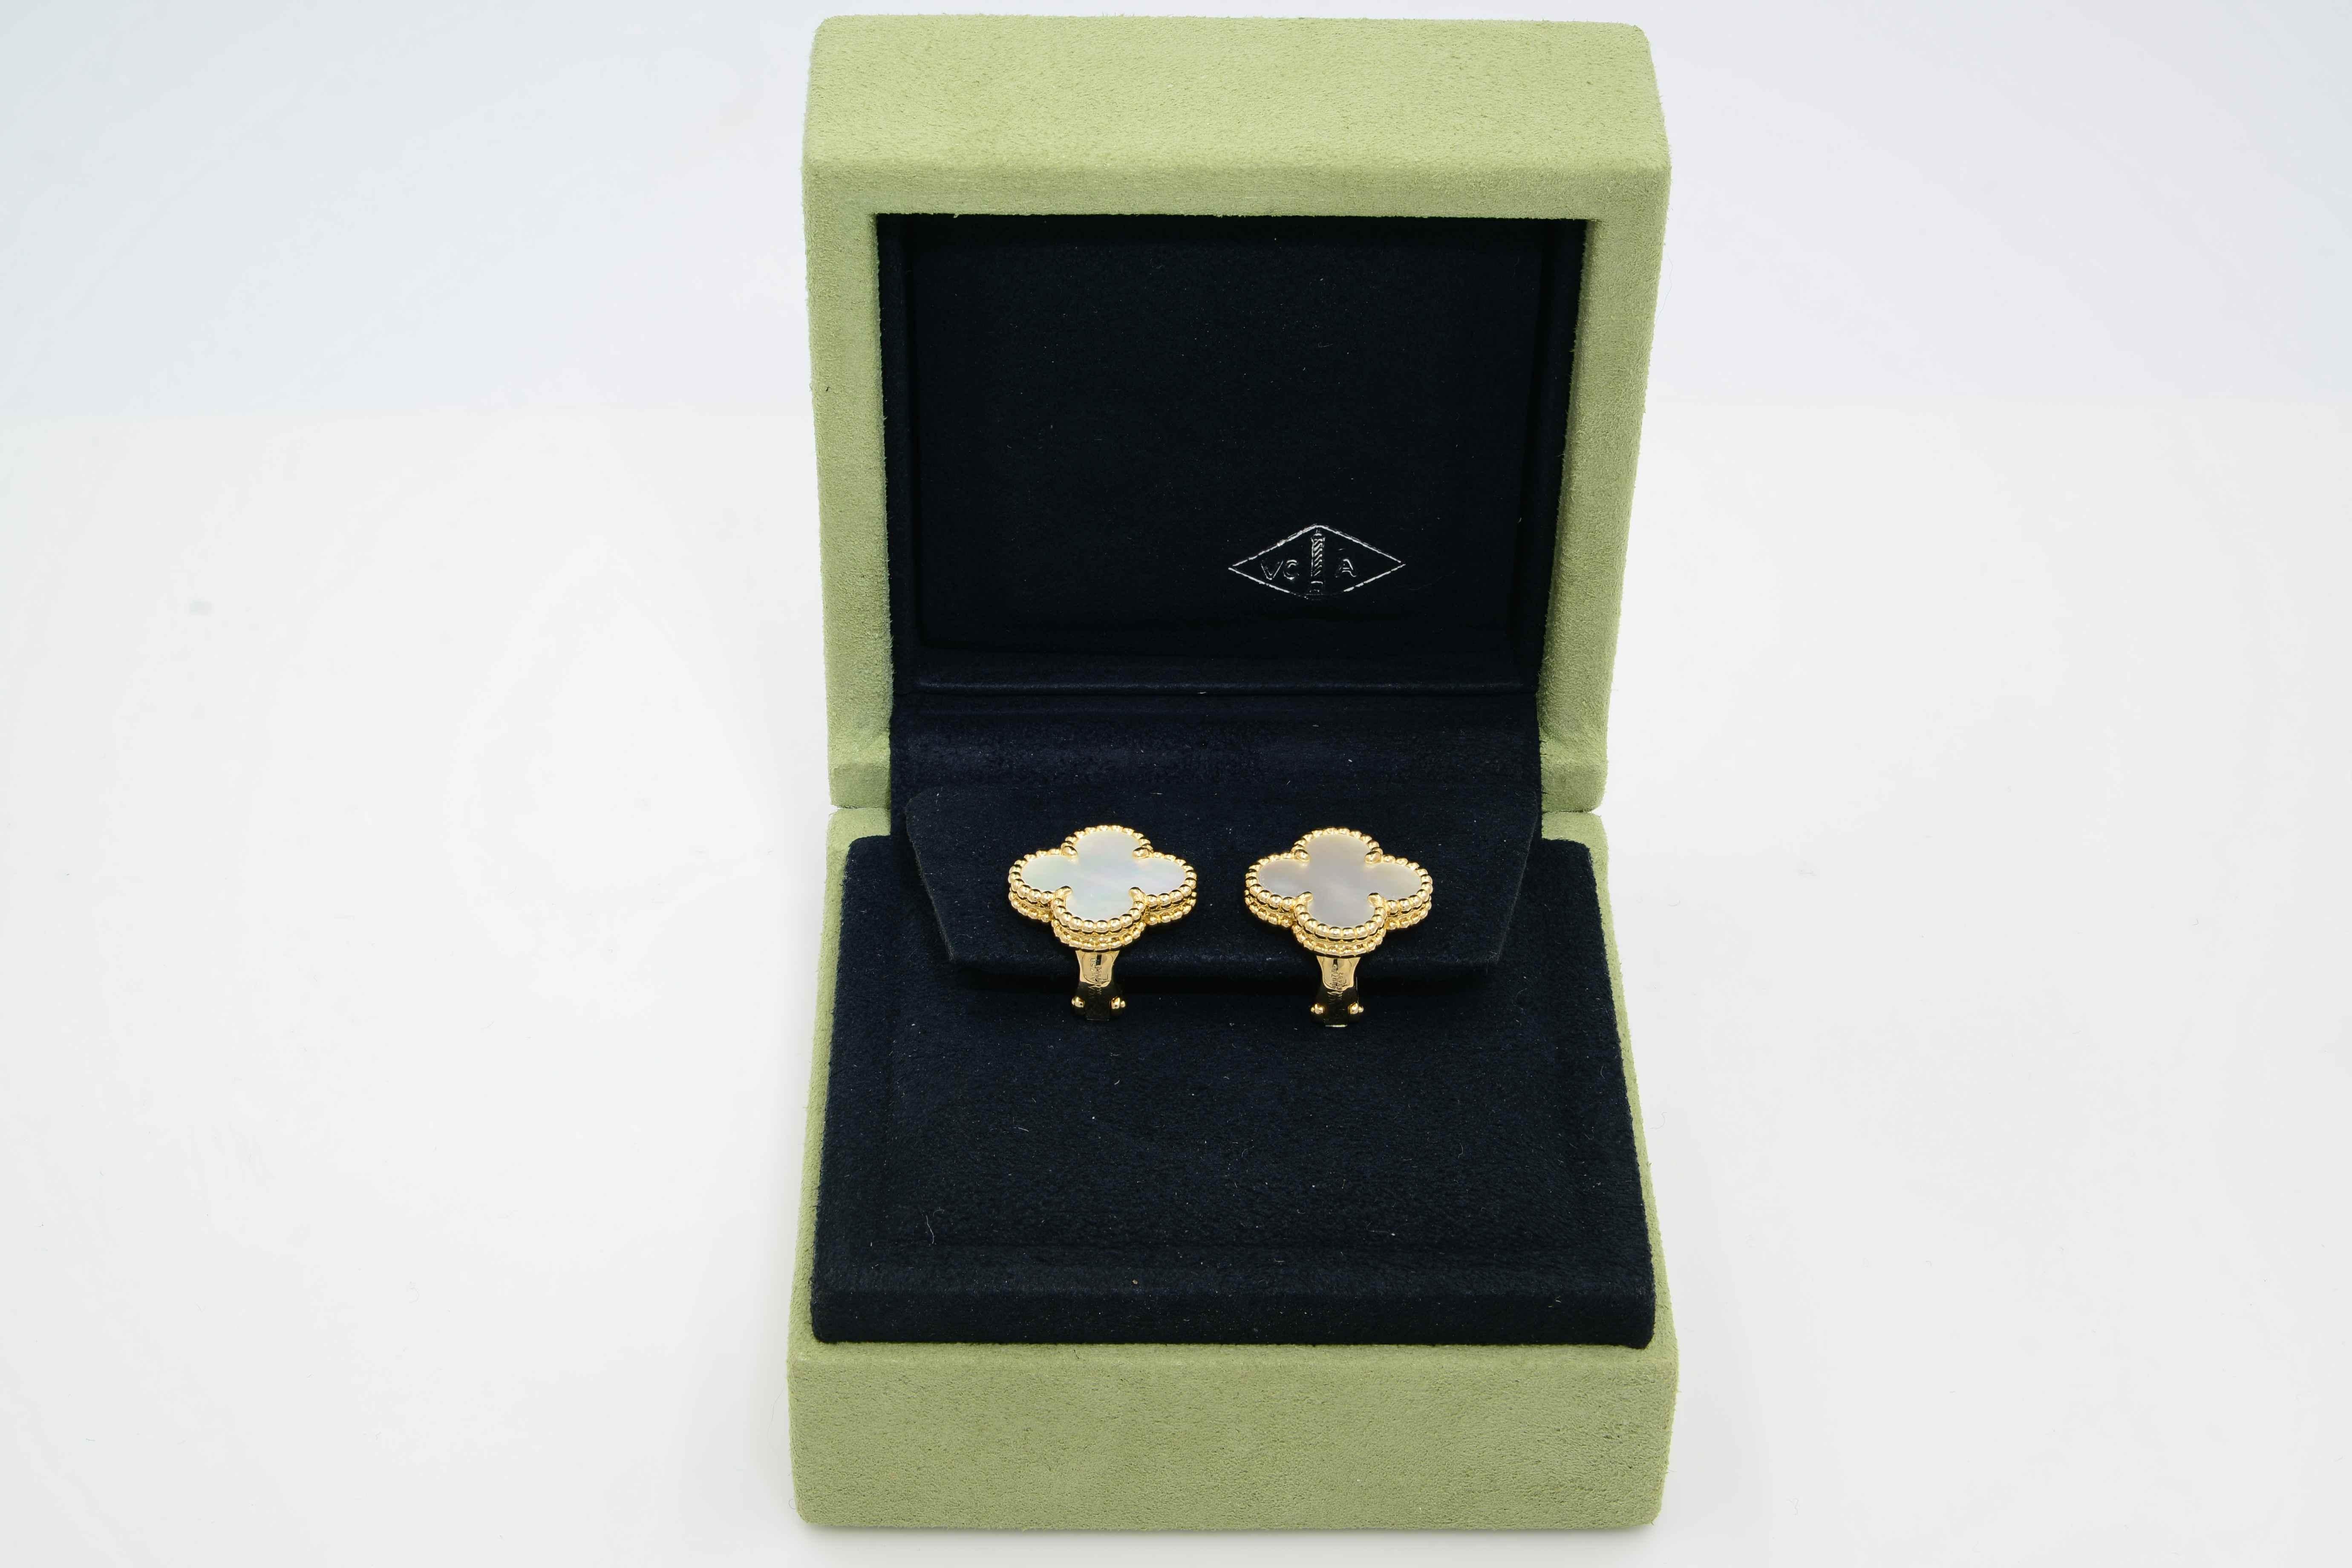 A single clover motif adorns Van Cleef & Arpels' Vintage Alhambra Earrings! White mother of pearl is edged in a double row of 18K yellow gold beading in these pierced earrings with hallmarked omega-clip backings. 

They are in excellent condition